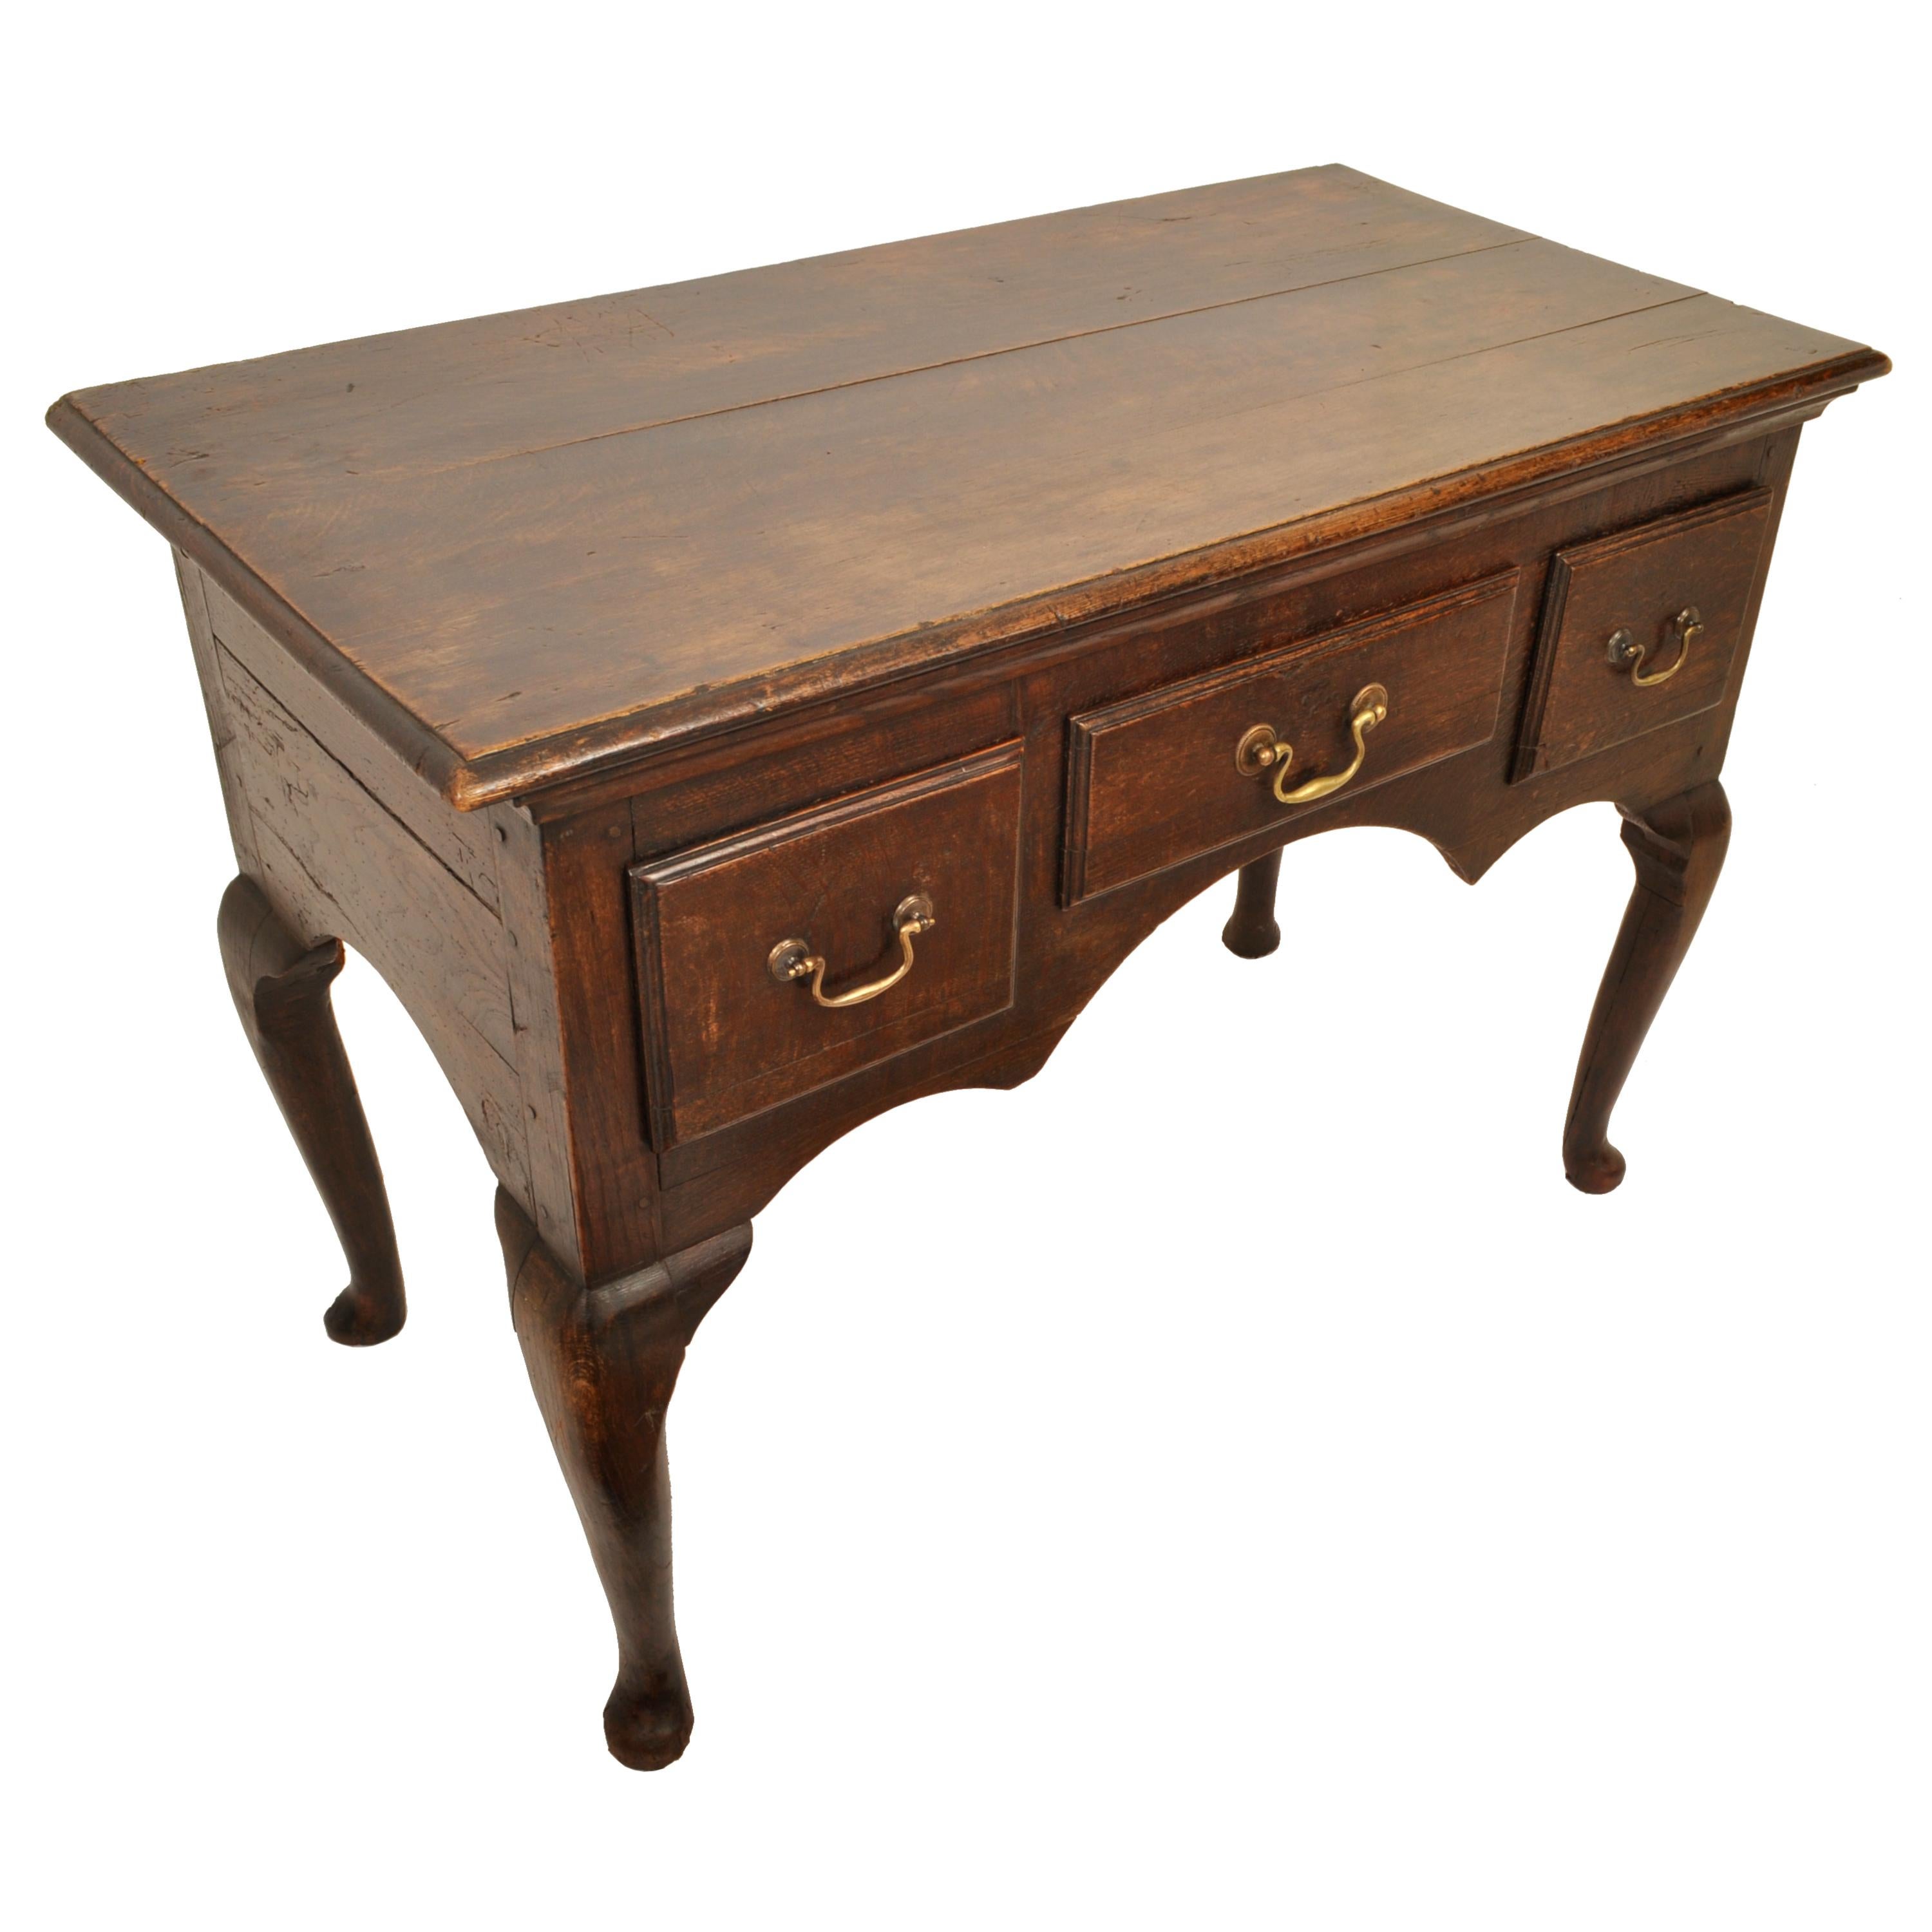 Antique Early 18th Century Georgian George II Oak Lowboy Dressing Table 1750 In Good Condition For Sale In Portland, OR